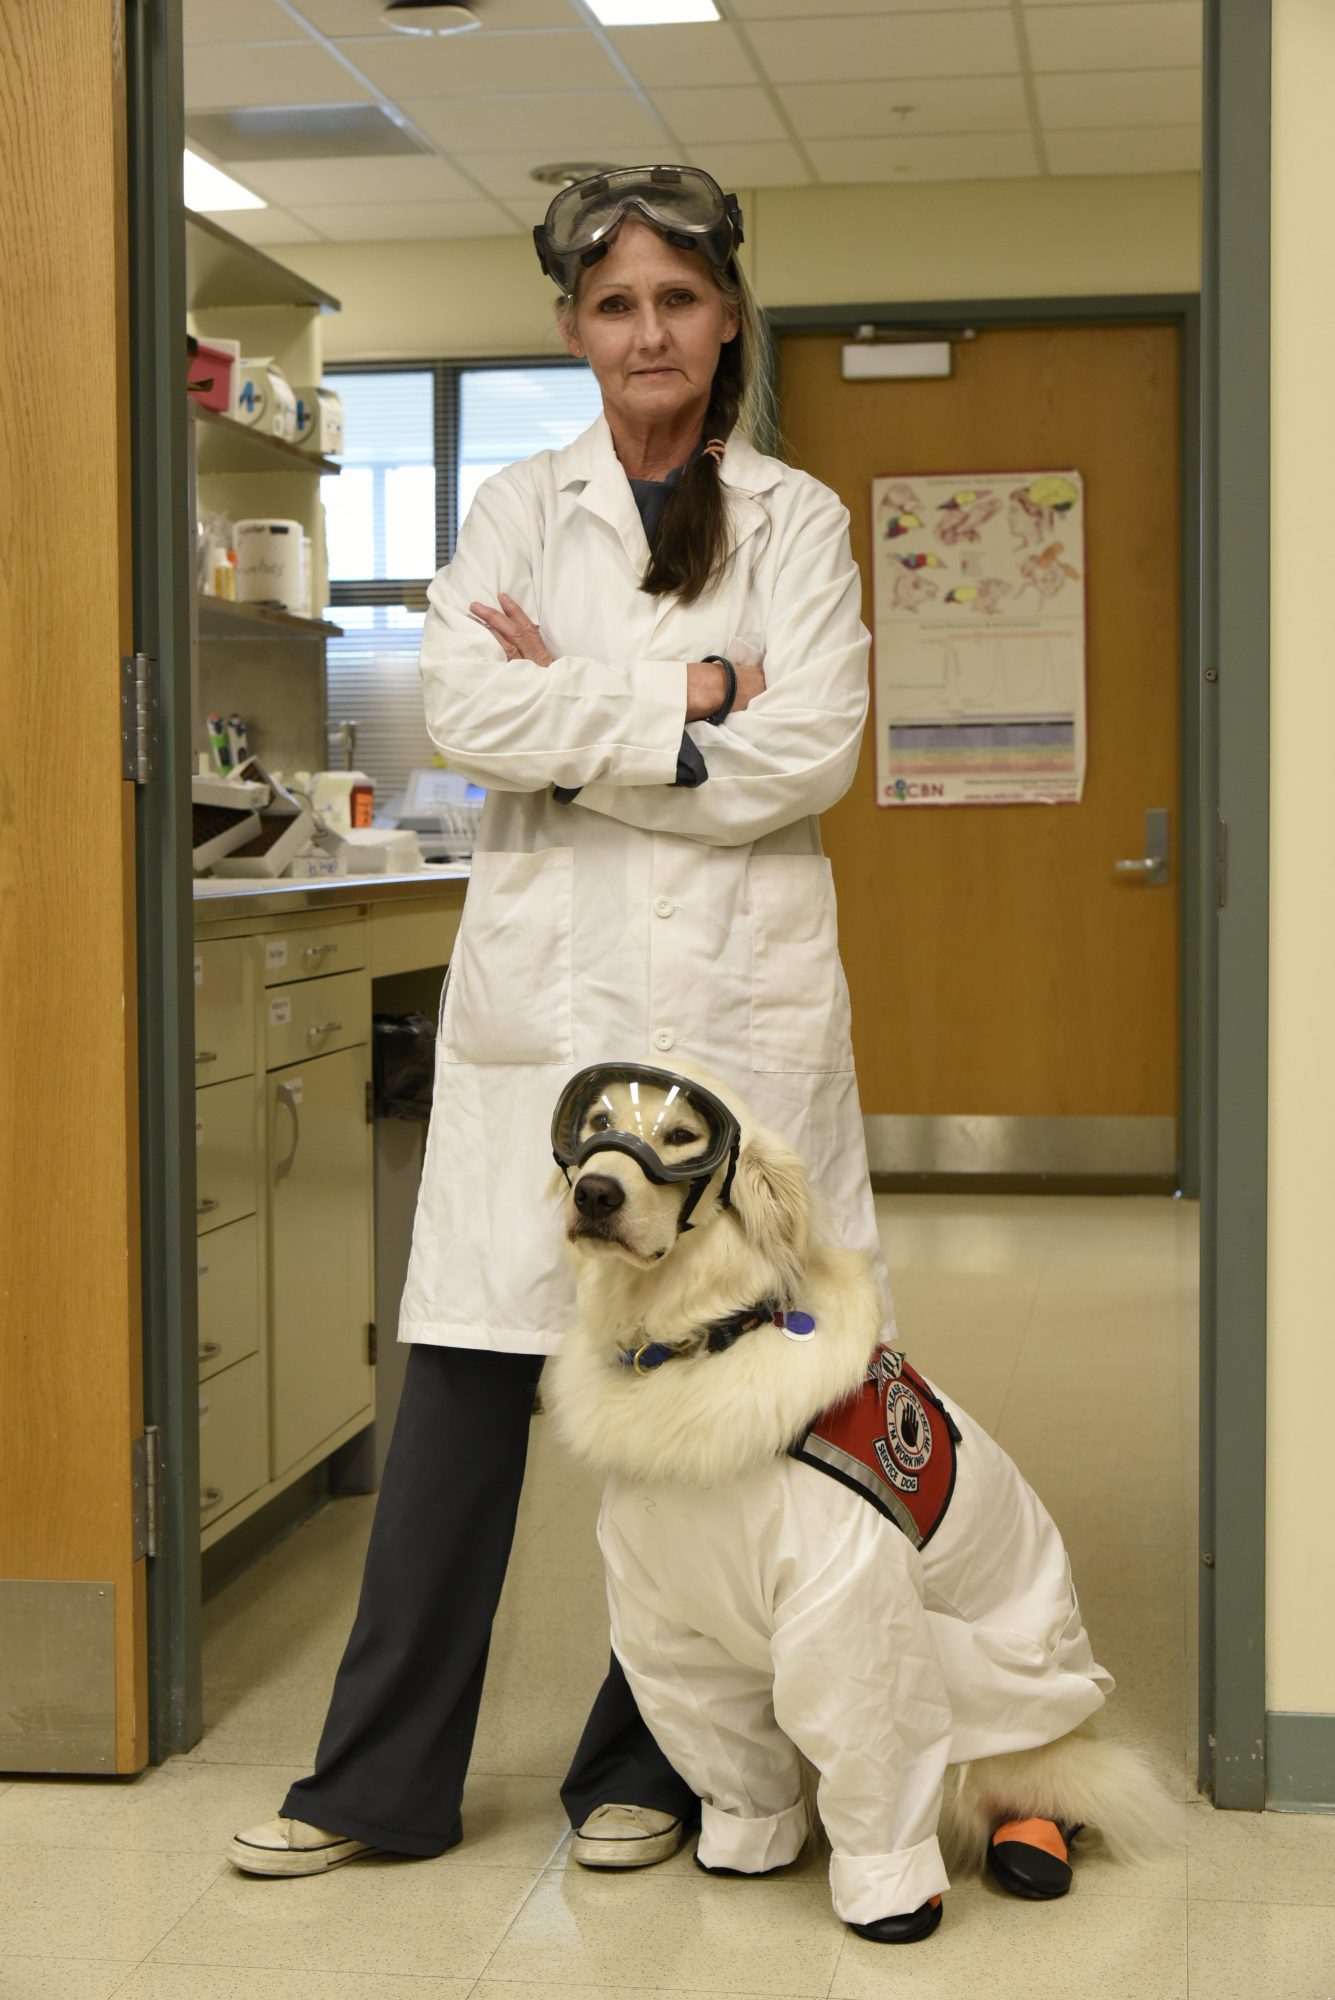 A person wearing a lab coat stands next to a golden retriever, who is also wearing a lab coat and goggles, in a lab.